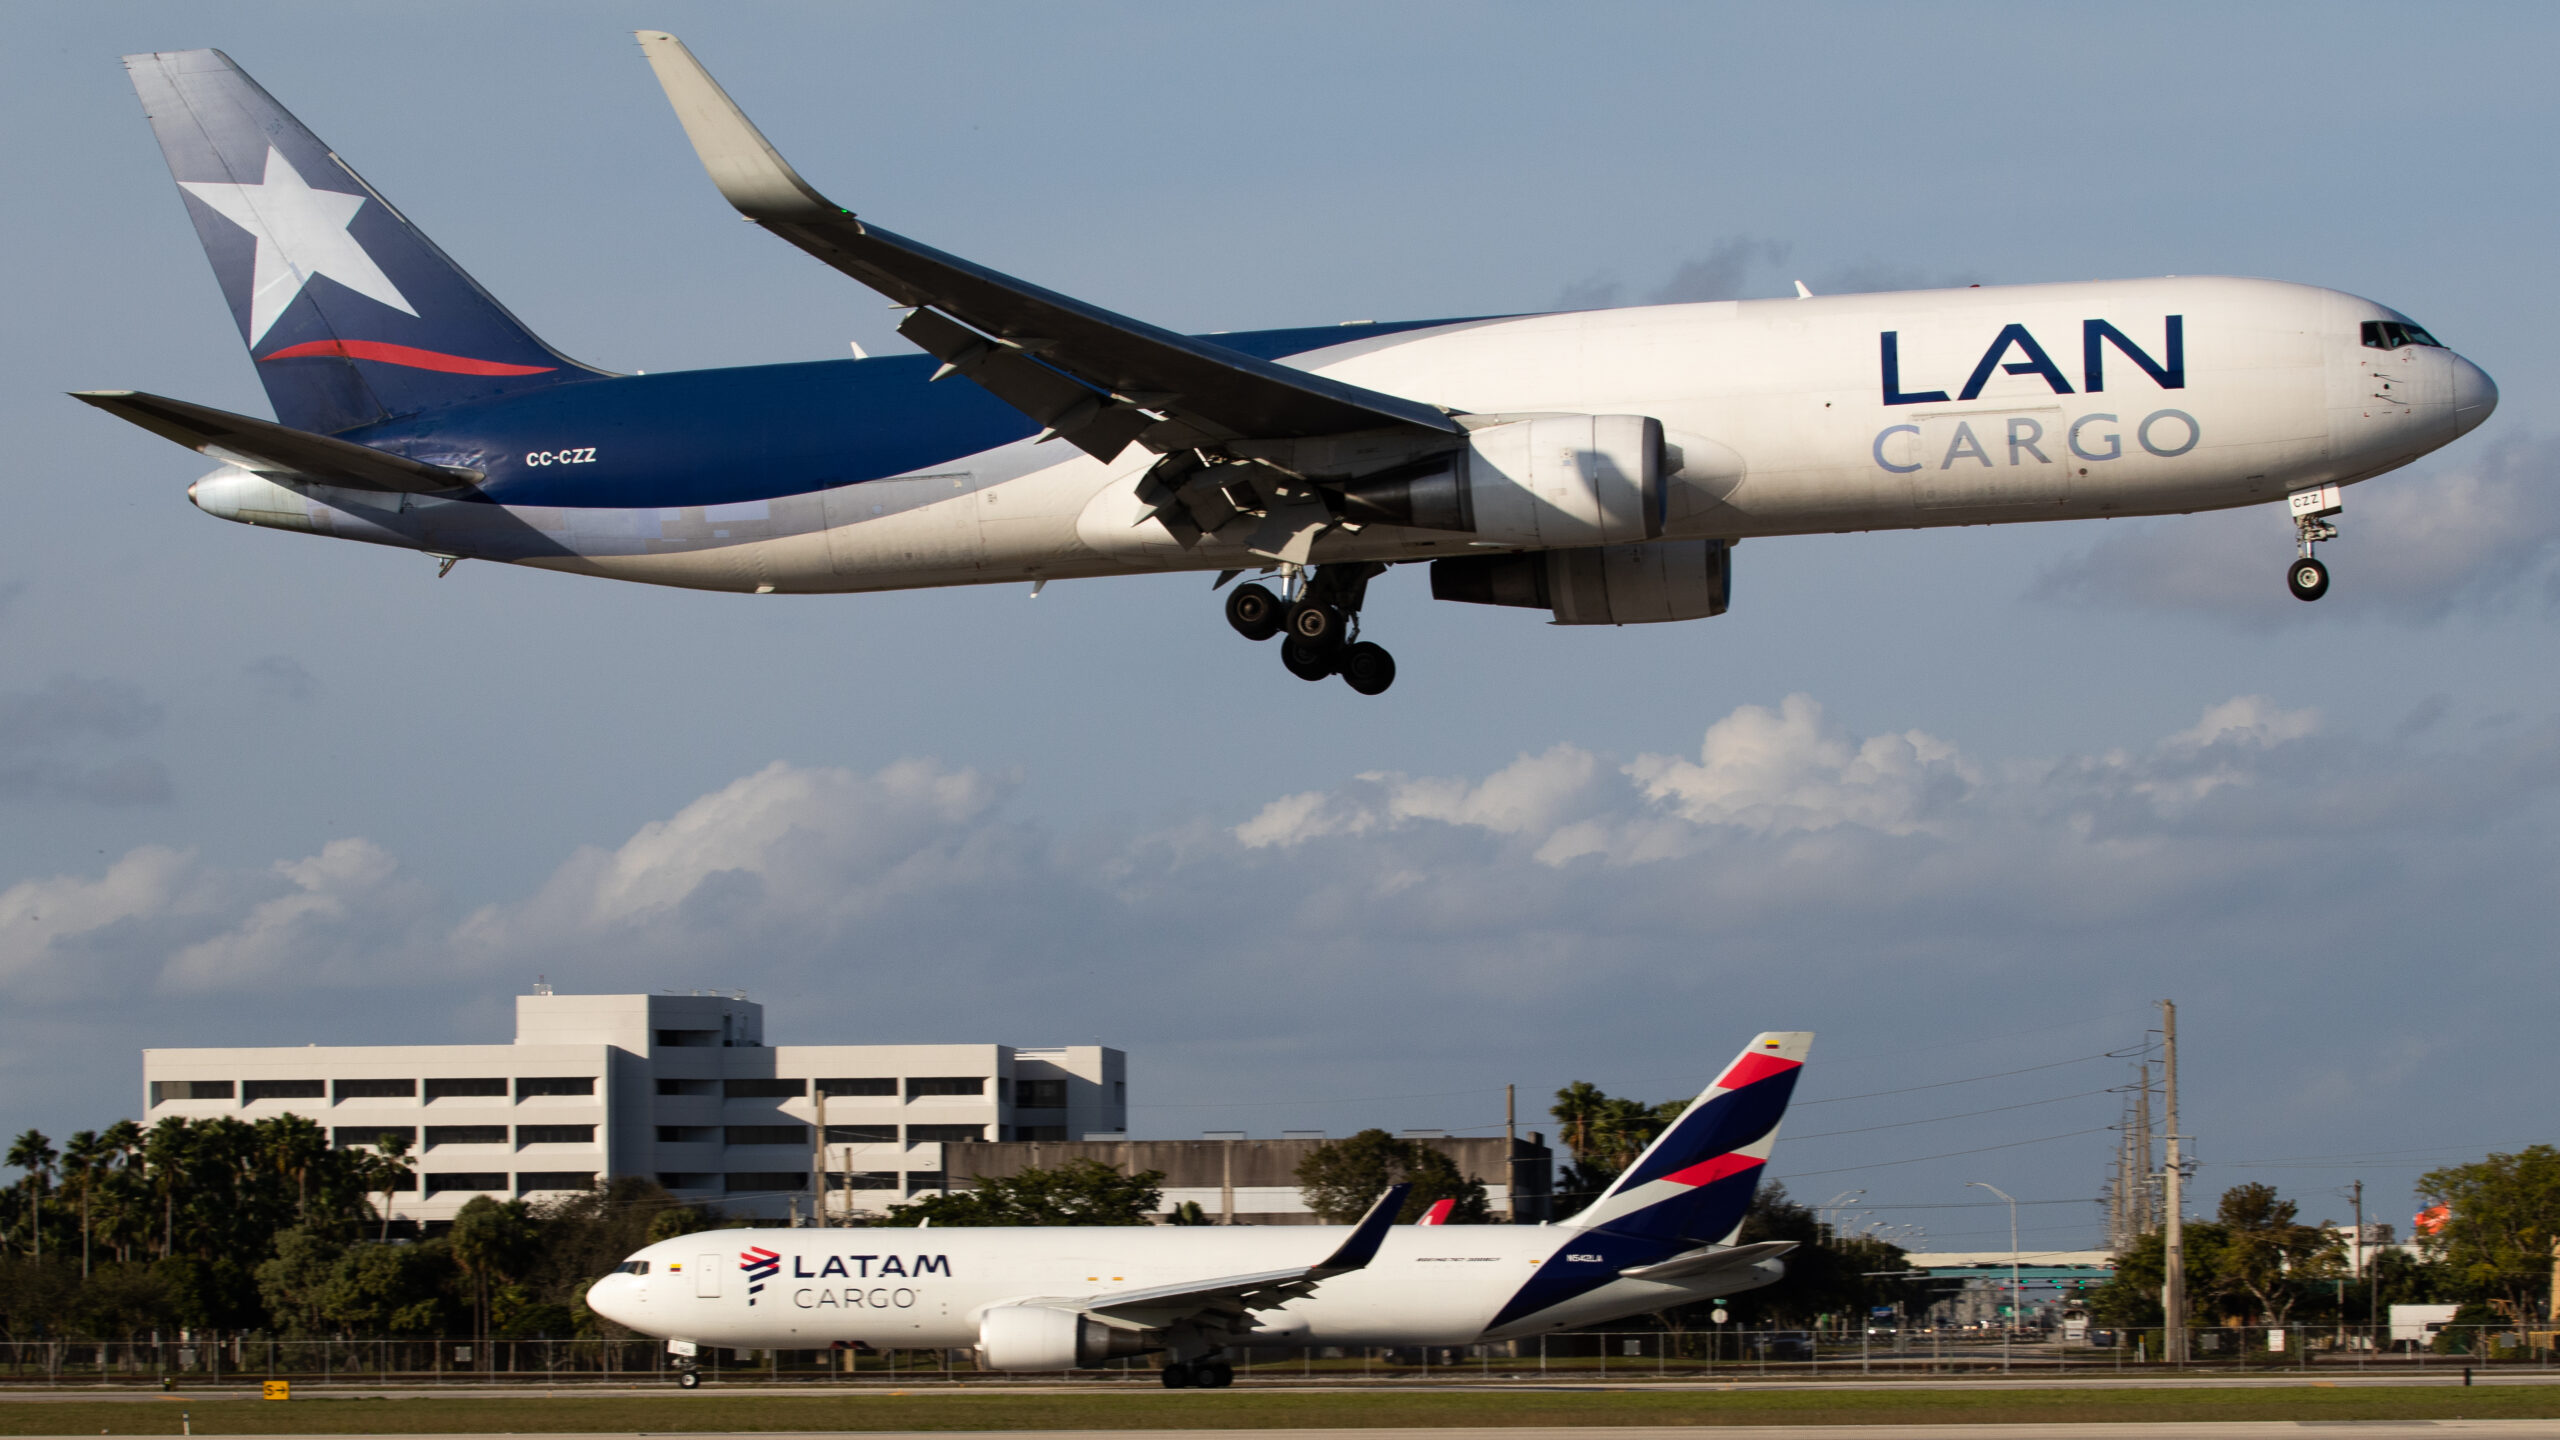 Airways Magazine on X: LATAM Cargo has launched a new freight